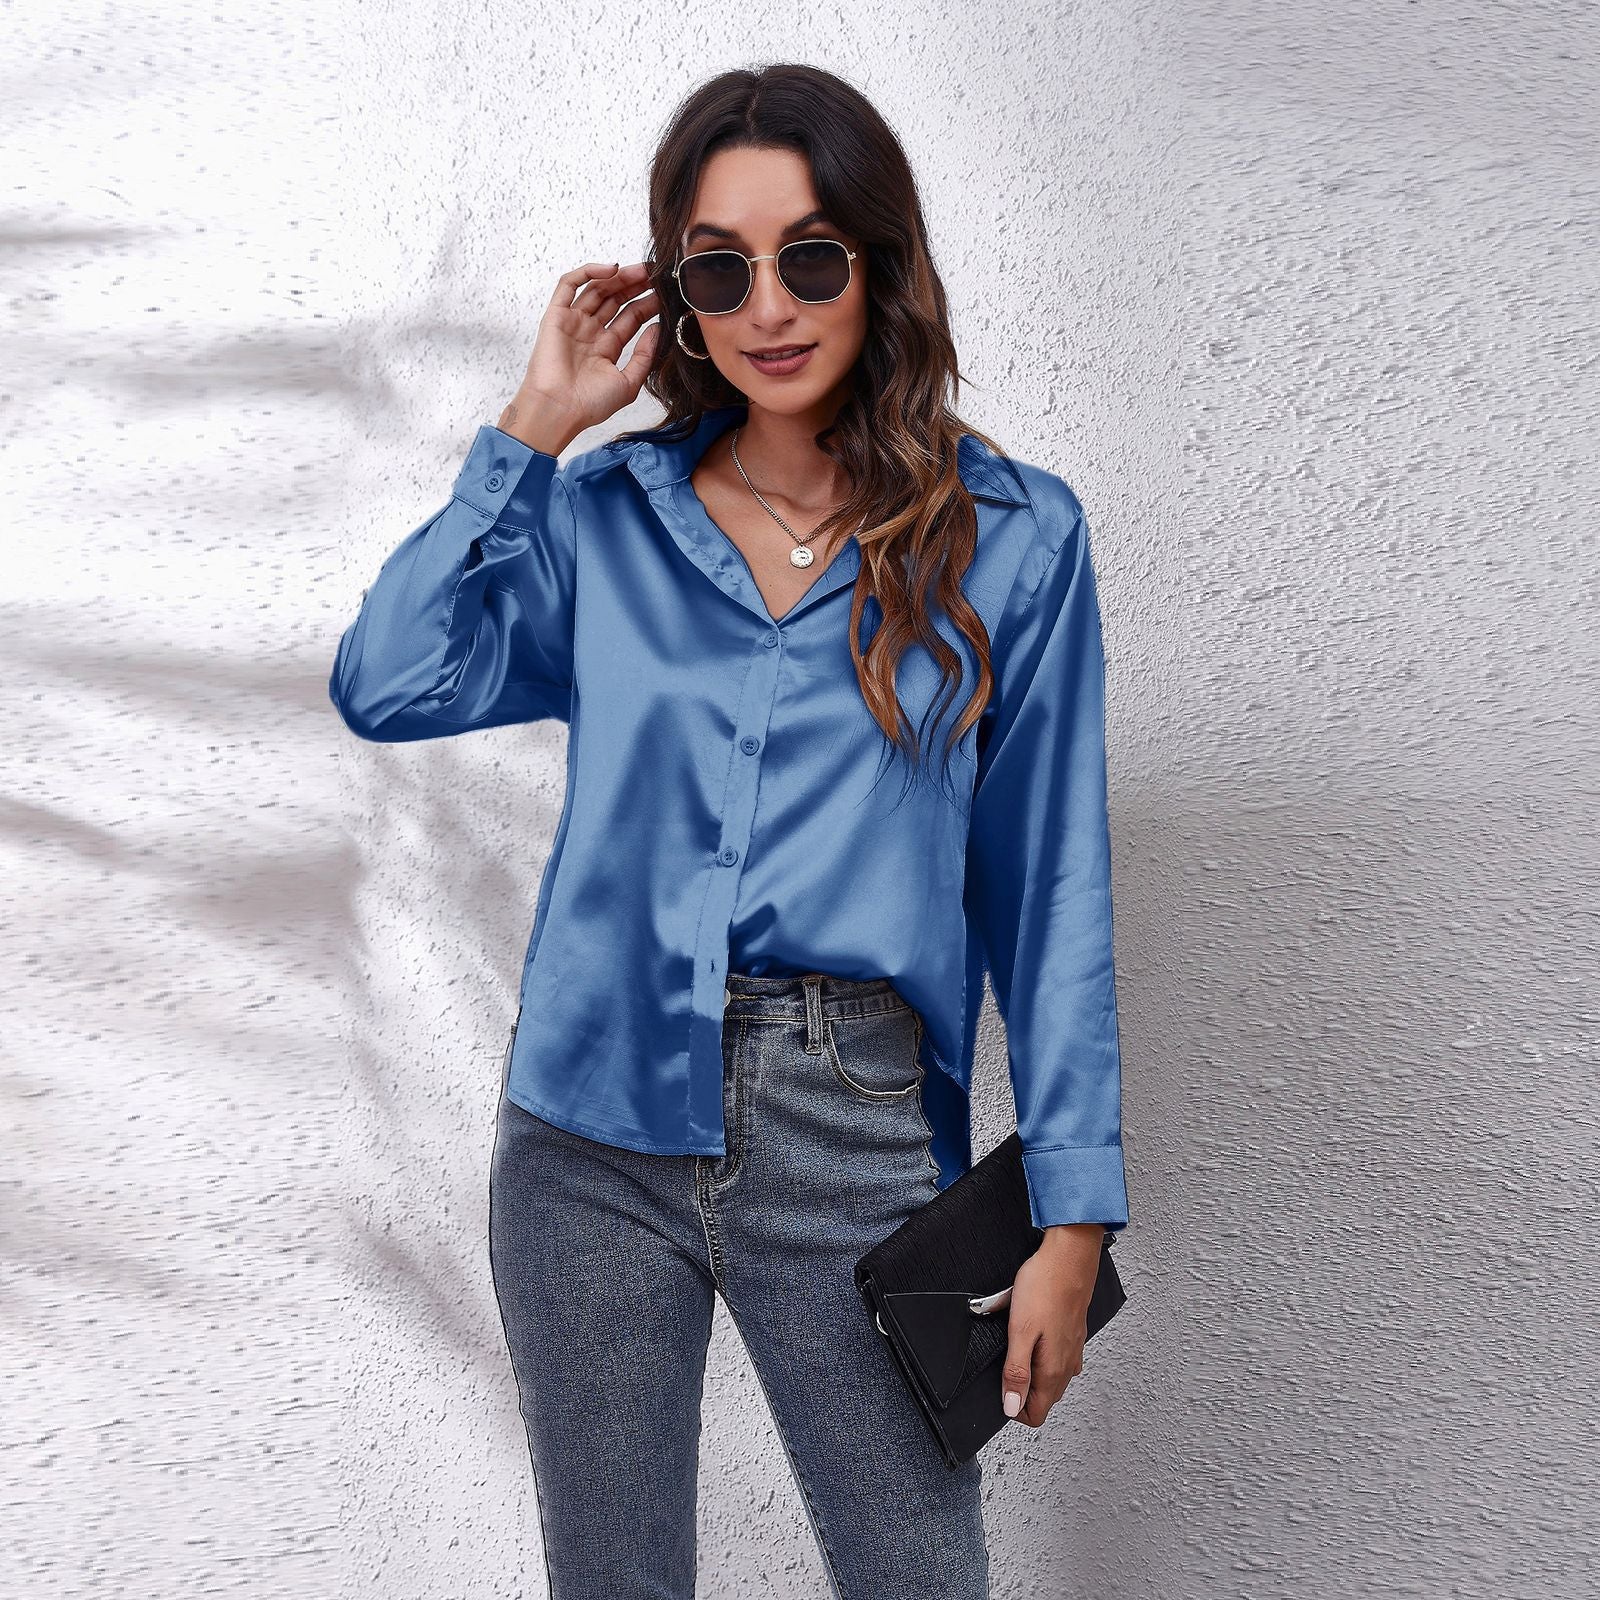 Women's Fashion Attractive Satin Shirt Long-sleeved Blouses